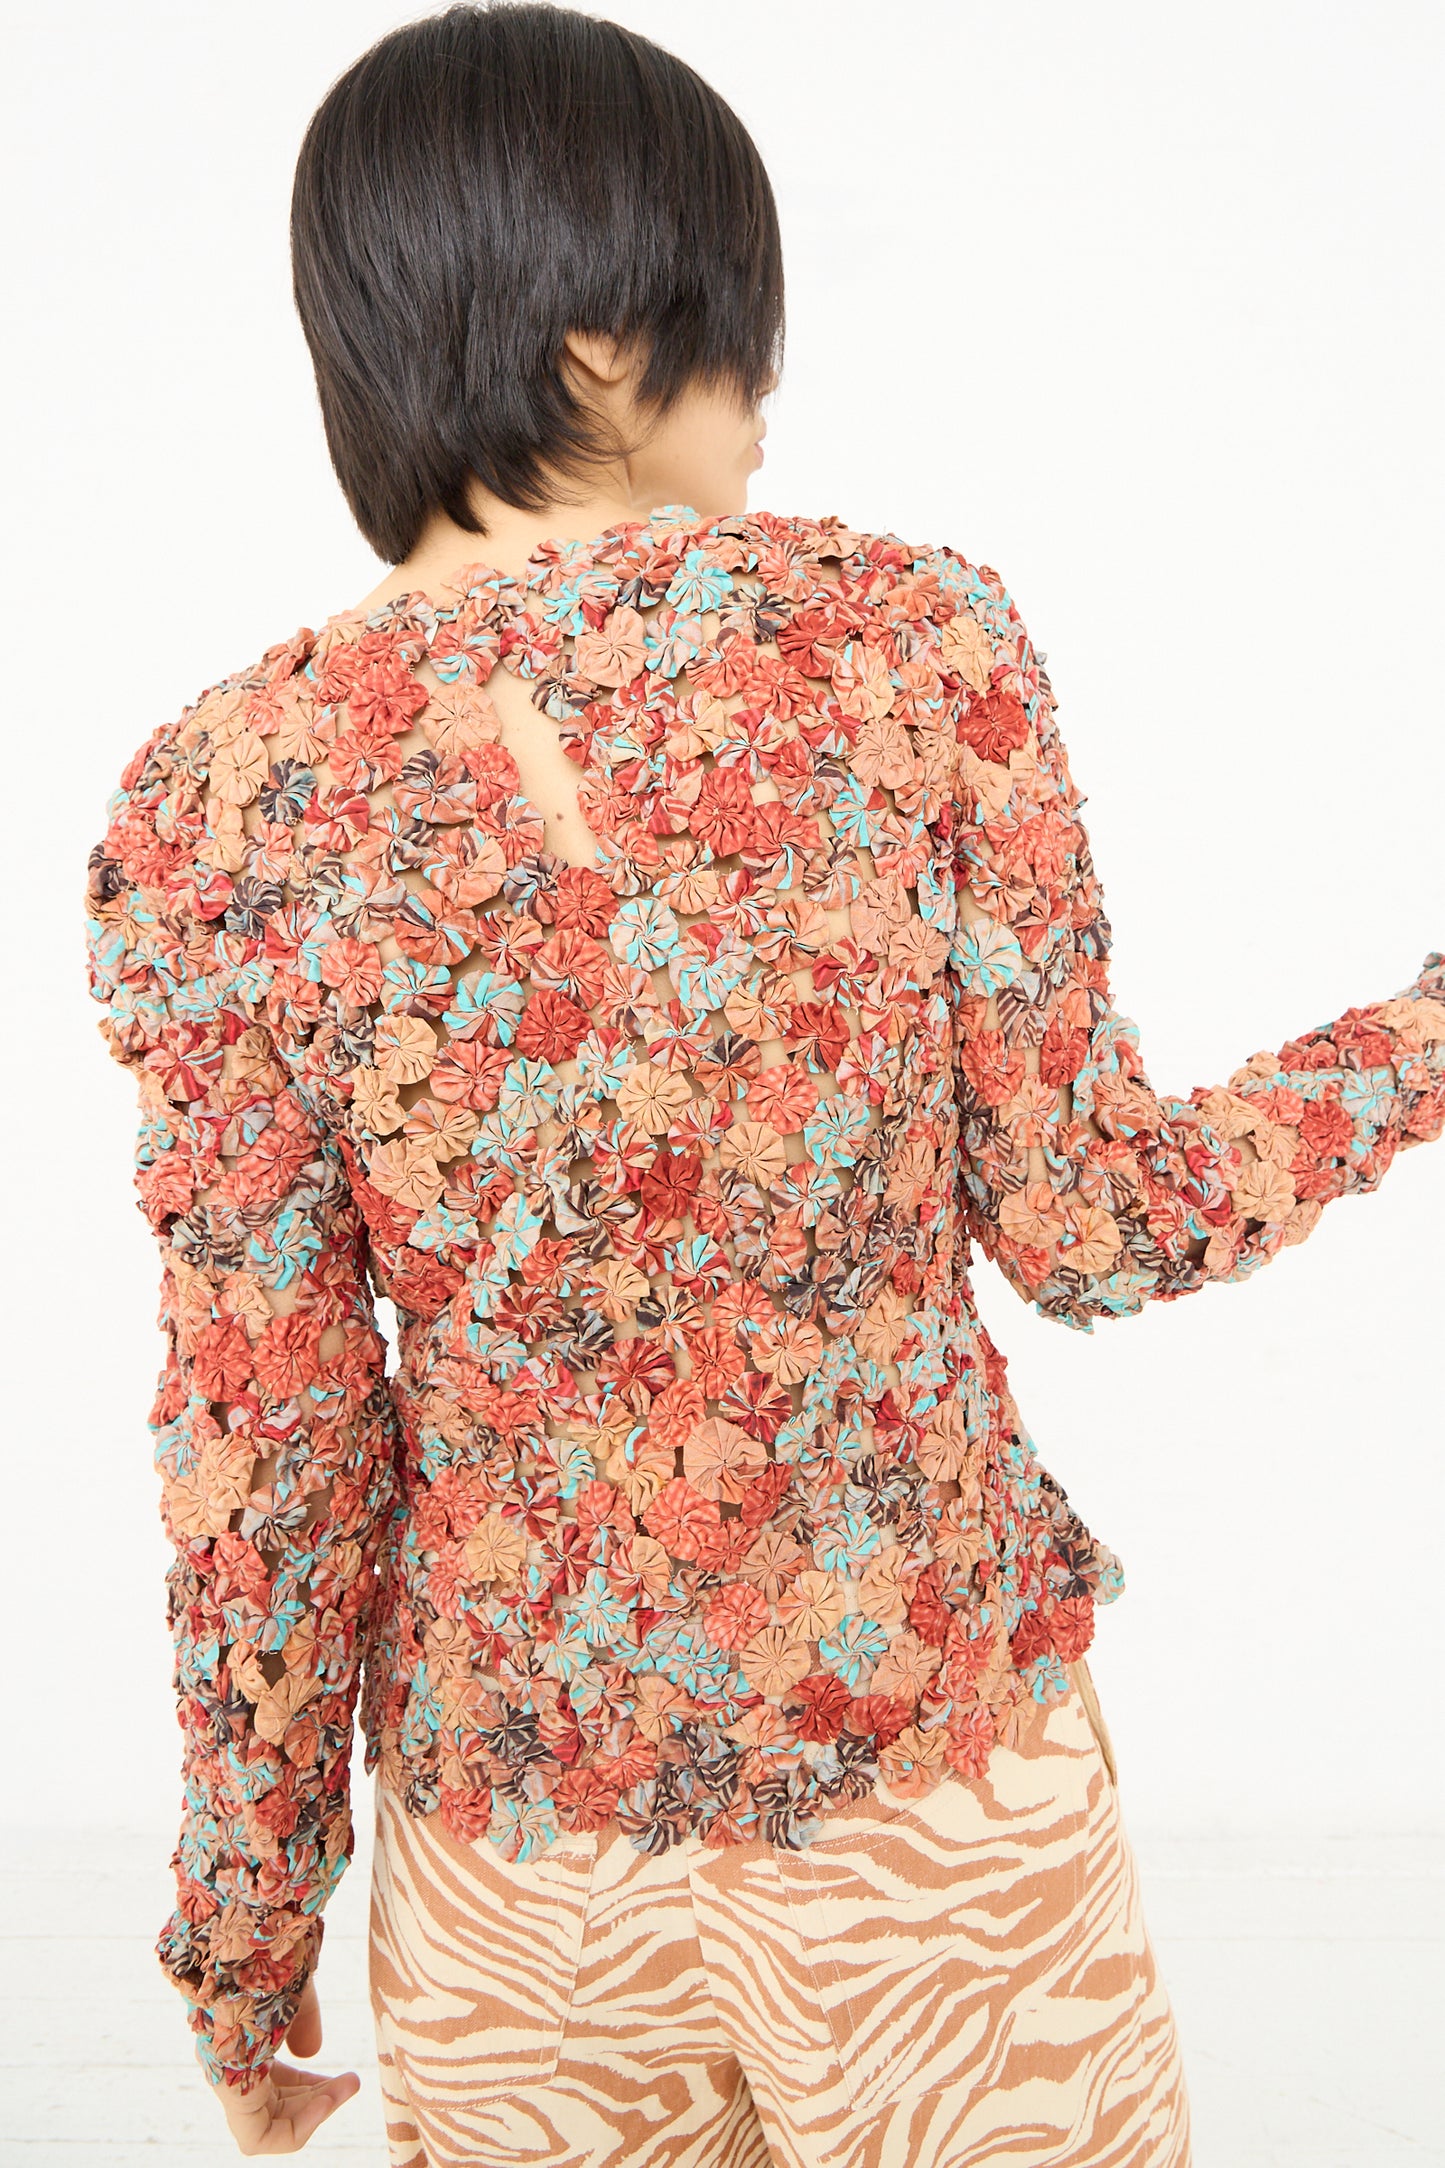 Woman posing with her back to the camera showcasing a Ulla Johnson Magdalene Top in Mariposa, featuring a floral-patterned, long sleeve top with a cut-out detail and silk rosettes.